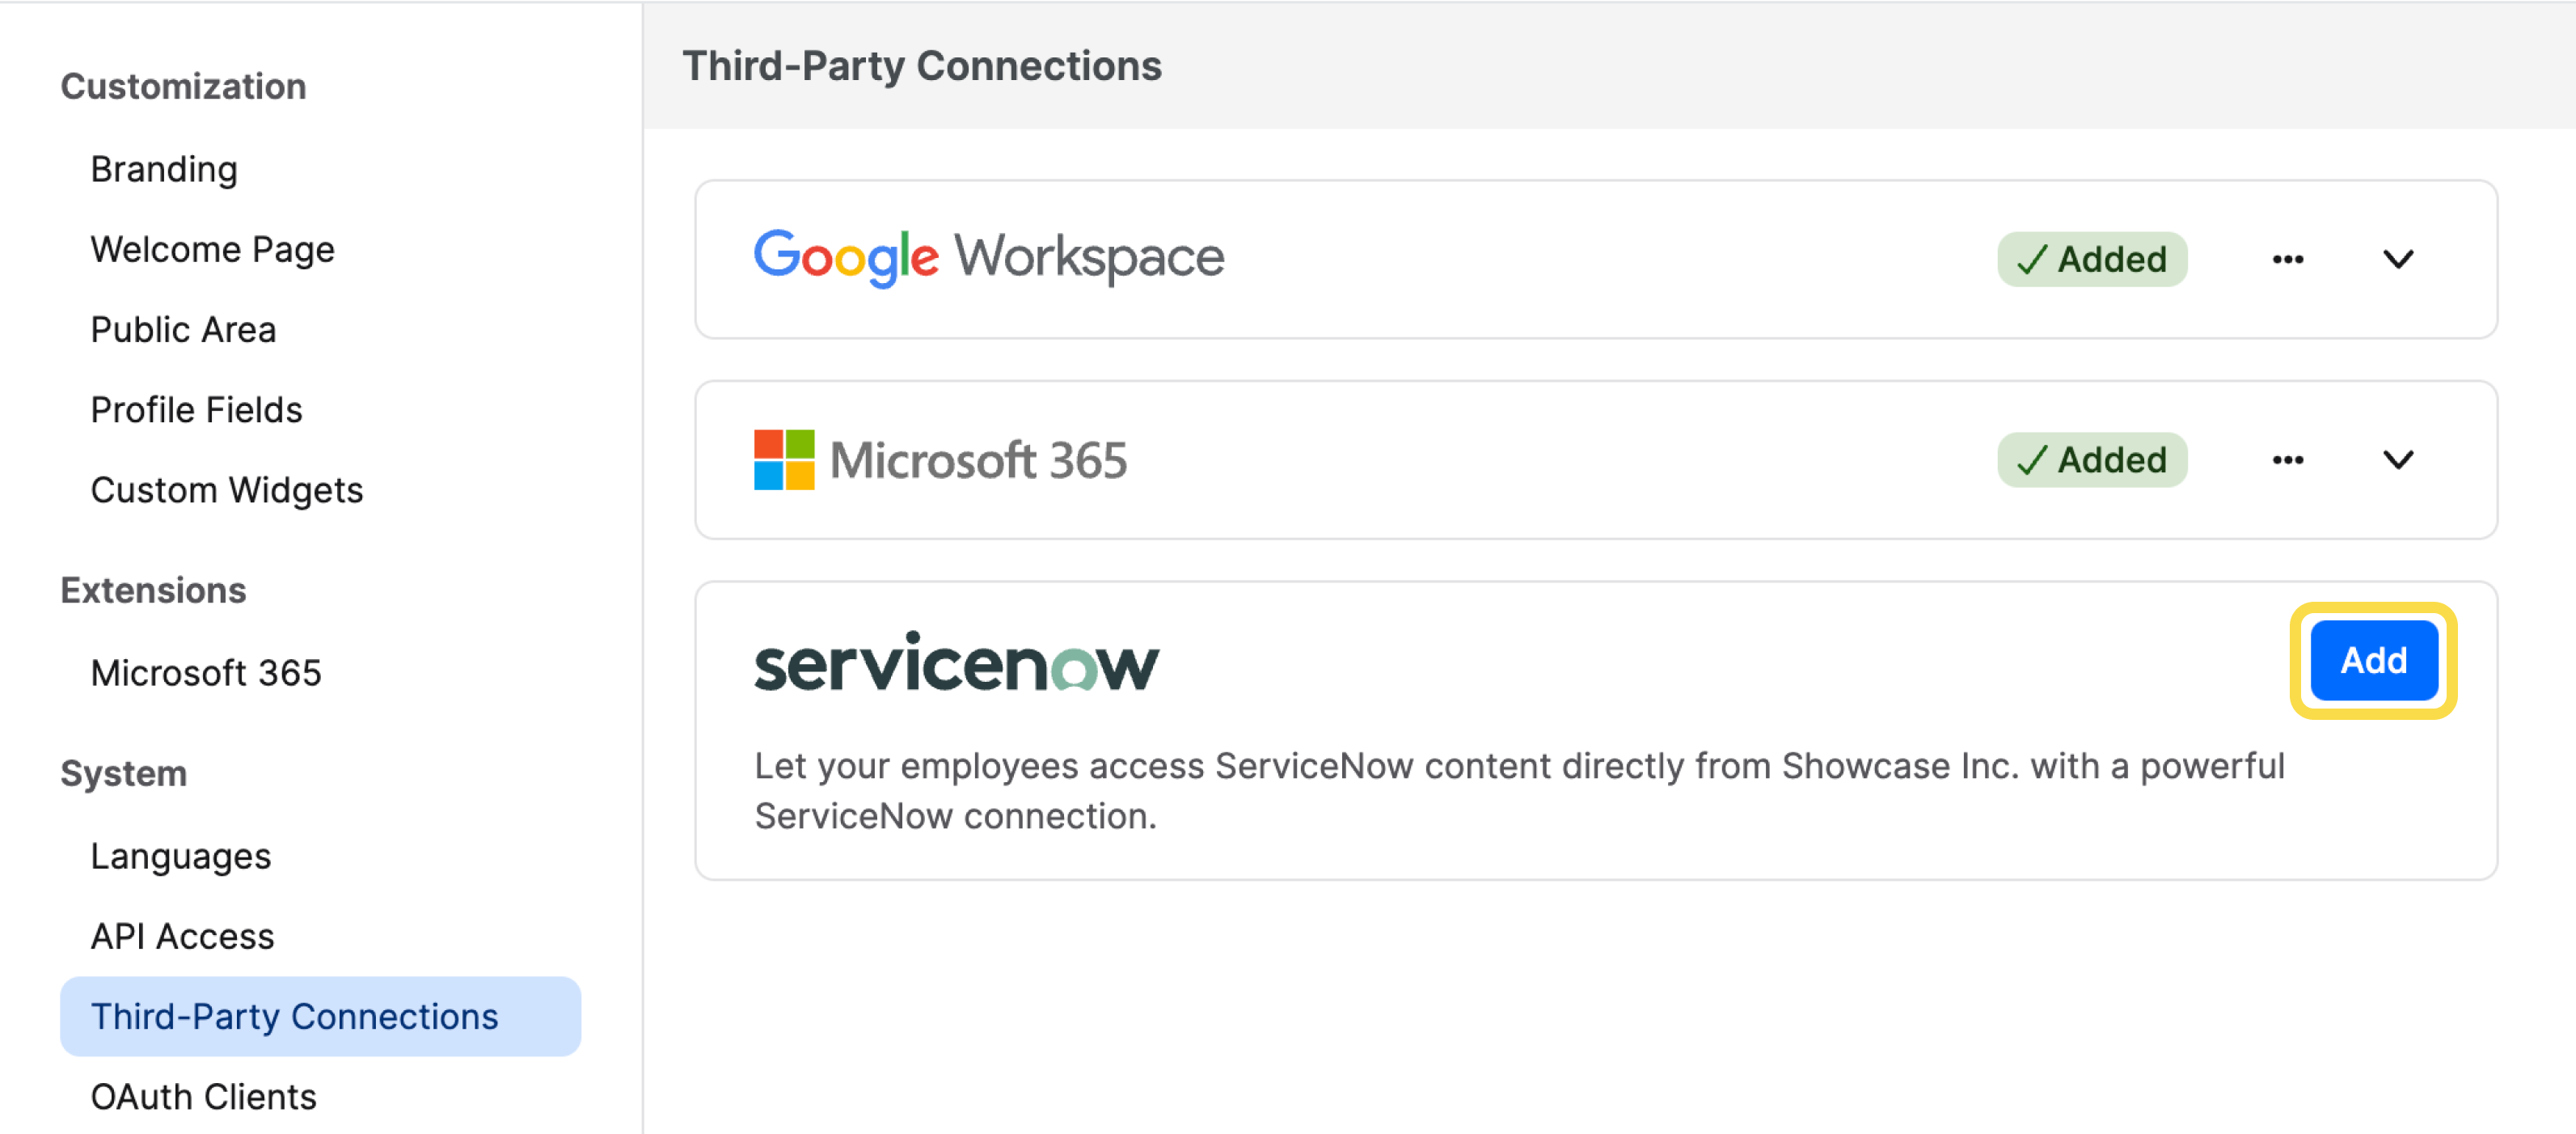 ServiceNow_Add.png